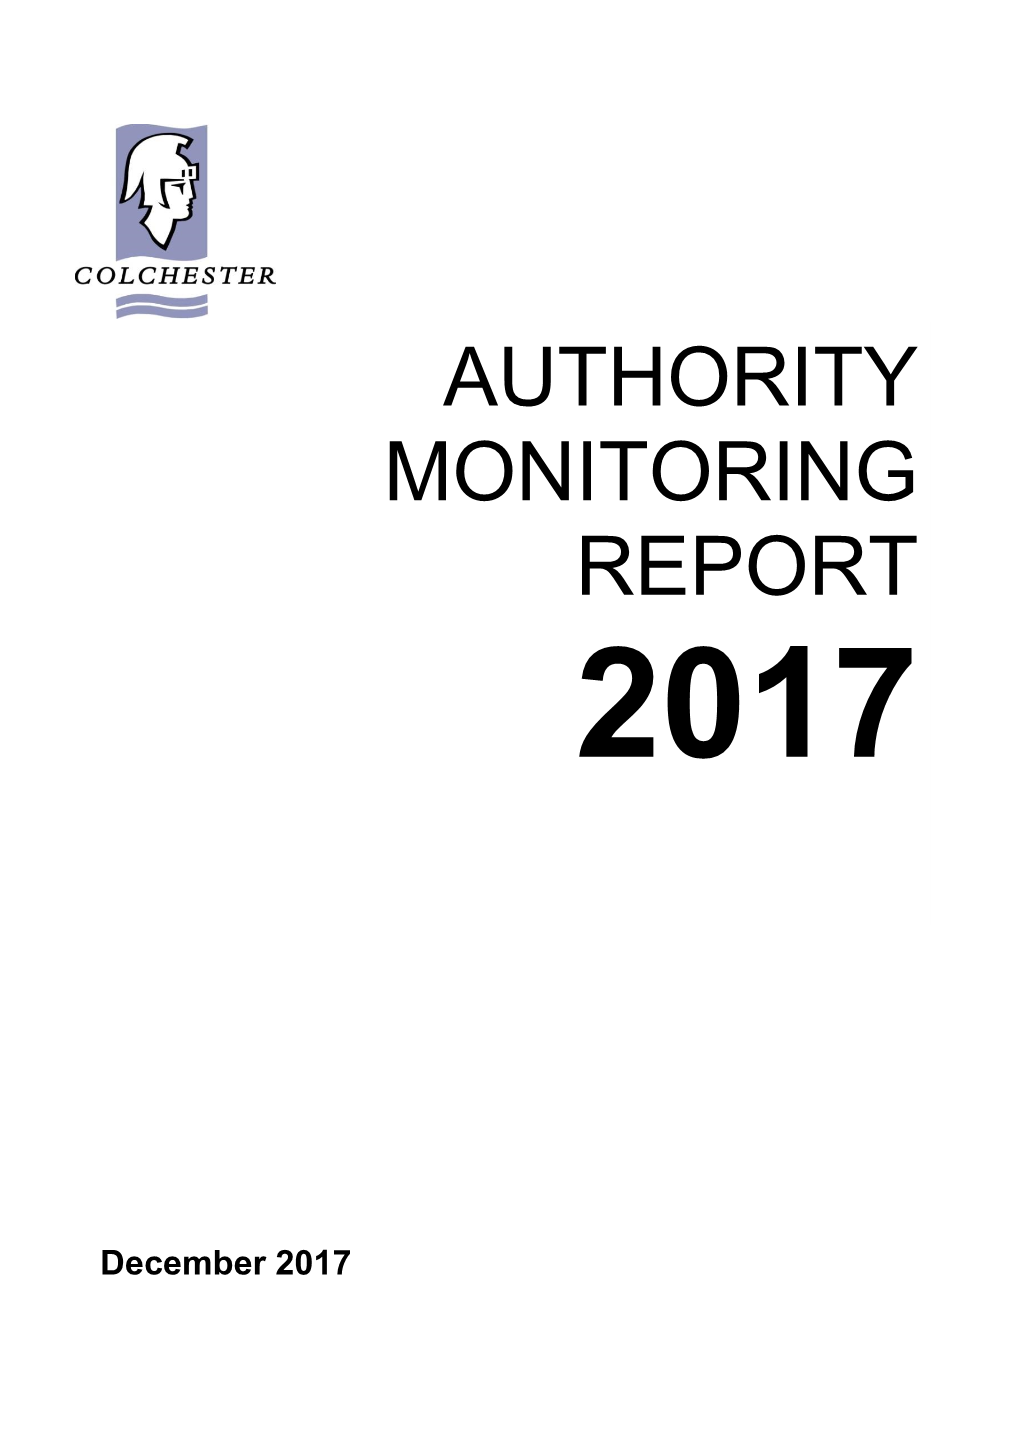 Authority Monitoring Report (AMR) Contains Information About the Extent to Which the Council’S Planning Policy Objectives Are Being Achieved